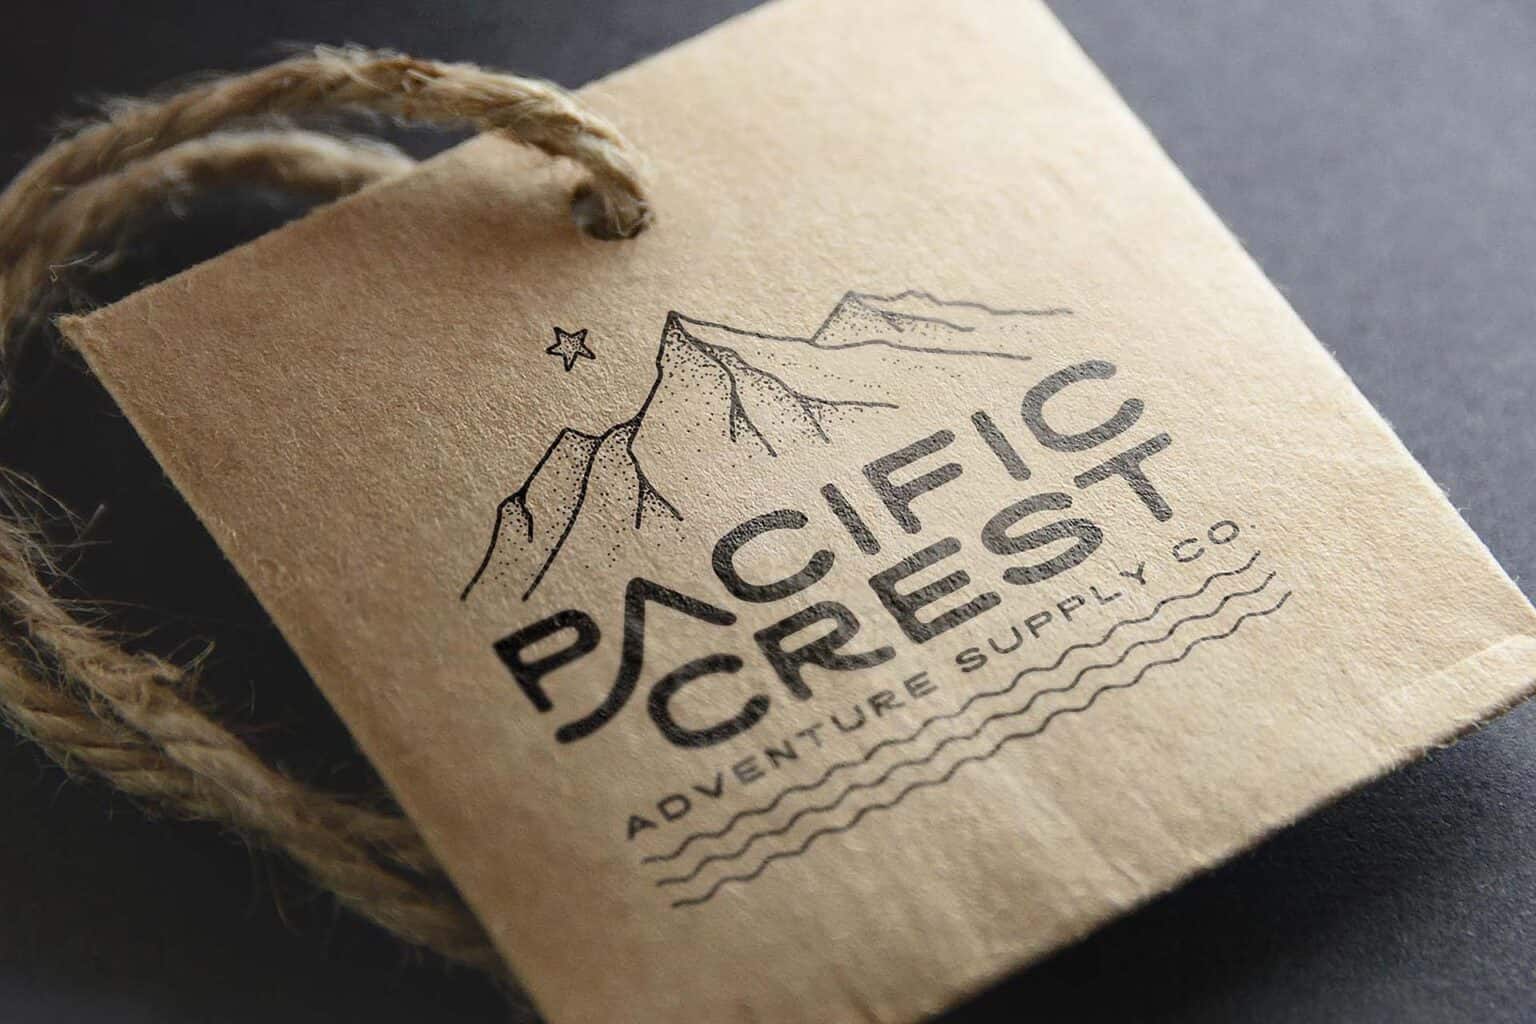 Pacific Crest logo typeface with illustration of mountains and waves